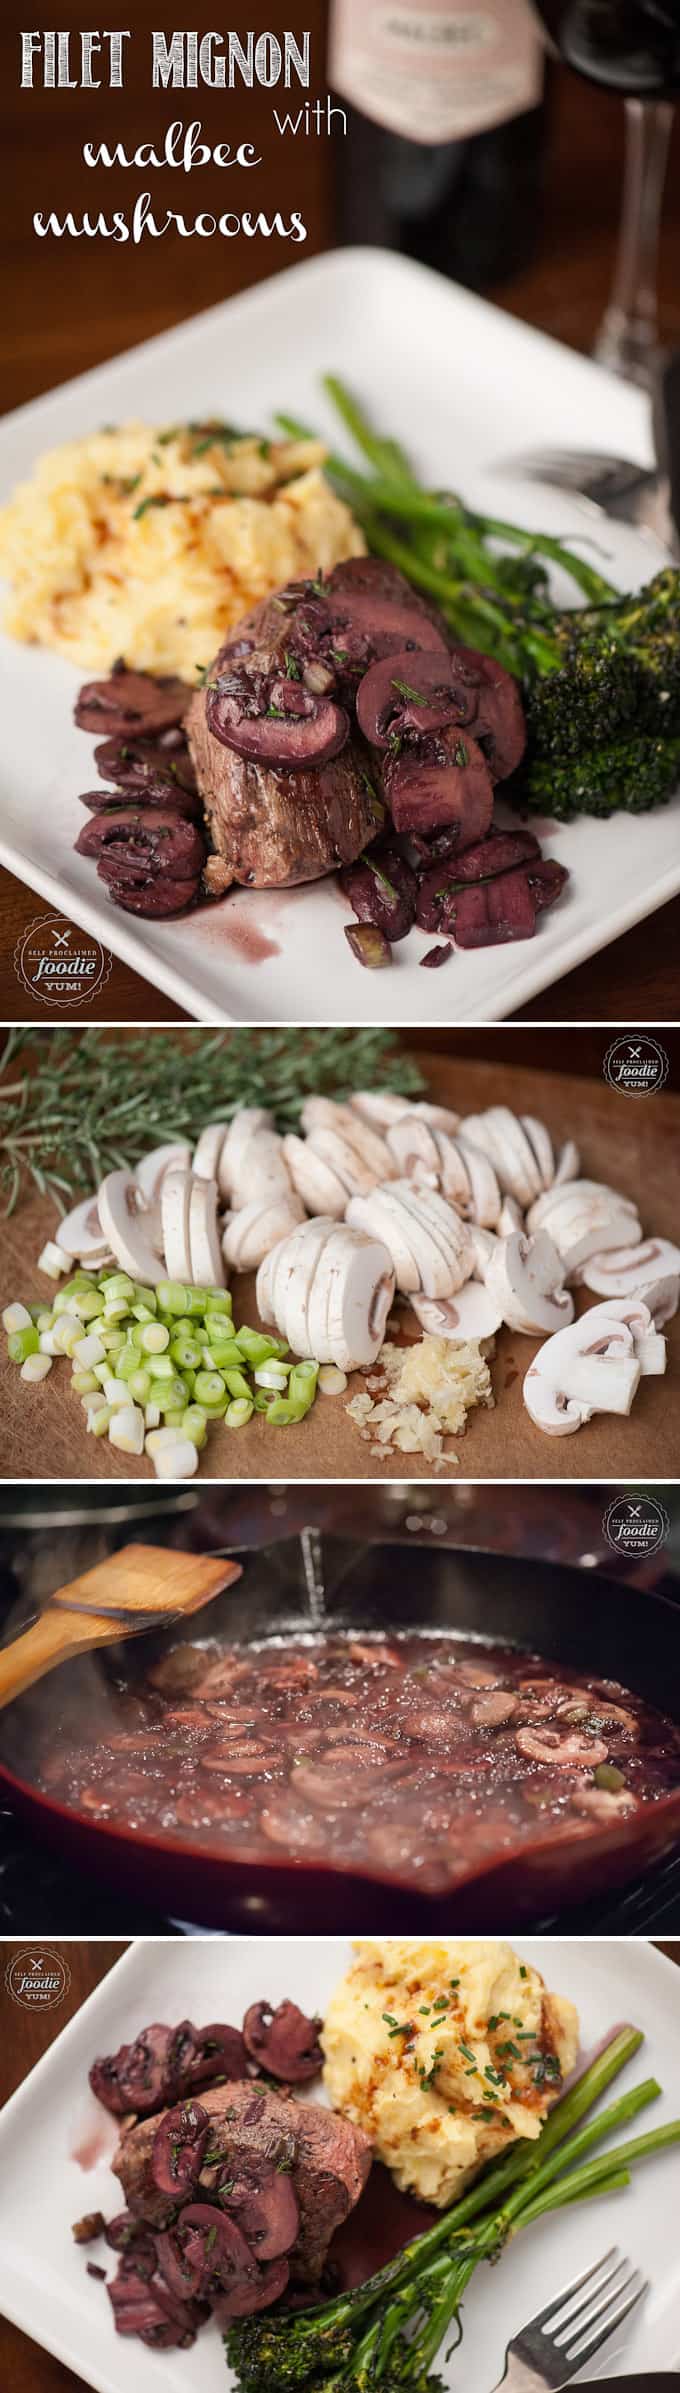 Create a delicious and sophisticated dinner when you make this mouthwatering Filet Mignon with Malbec Mushrooms.